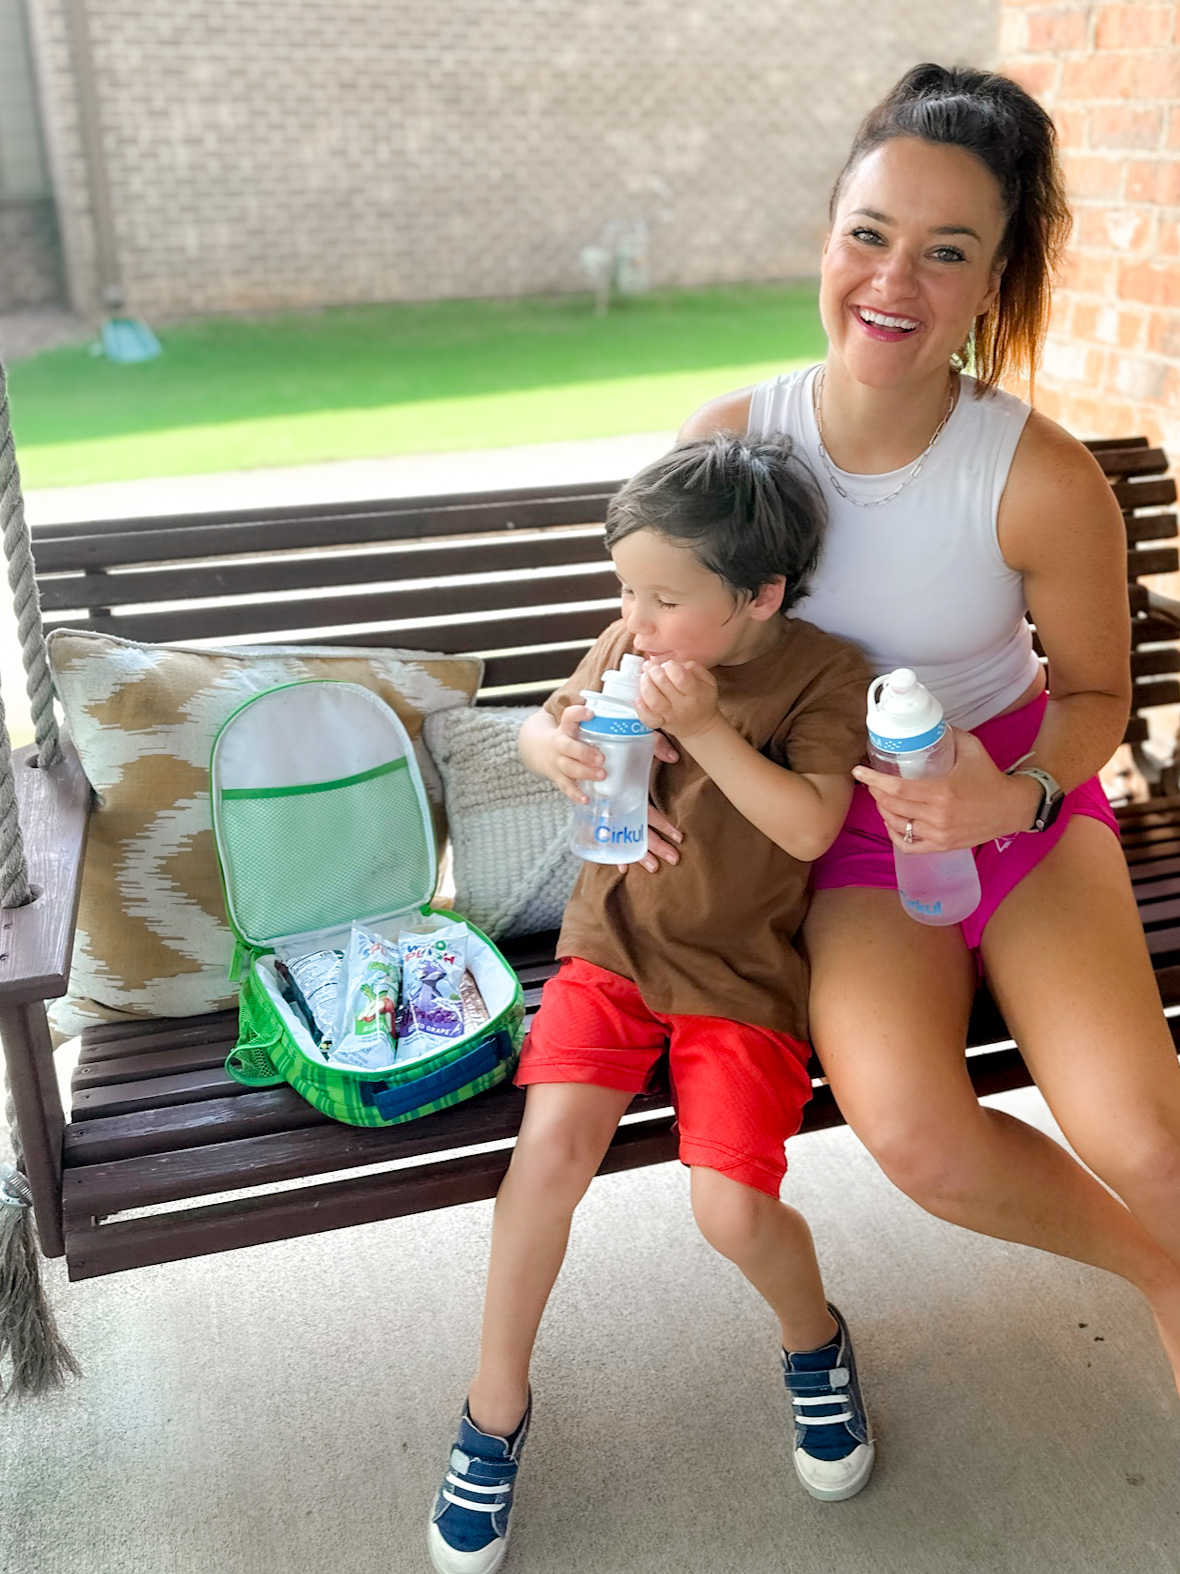 Christian Birmingham mom blogger and podcaster, Heather Brown, shares 12 ways to keep kids hydrated. Her tips are part of habit stacking.